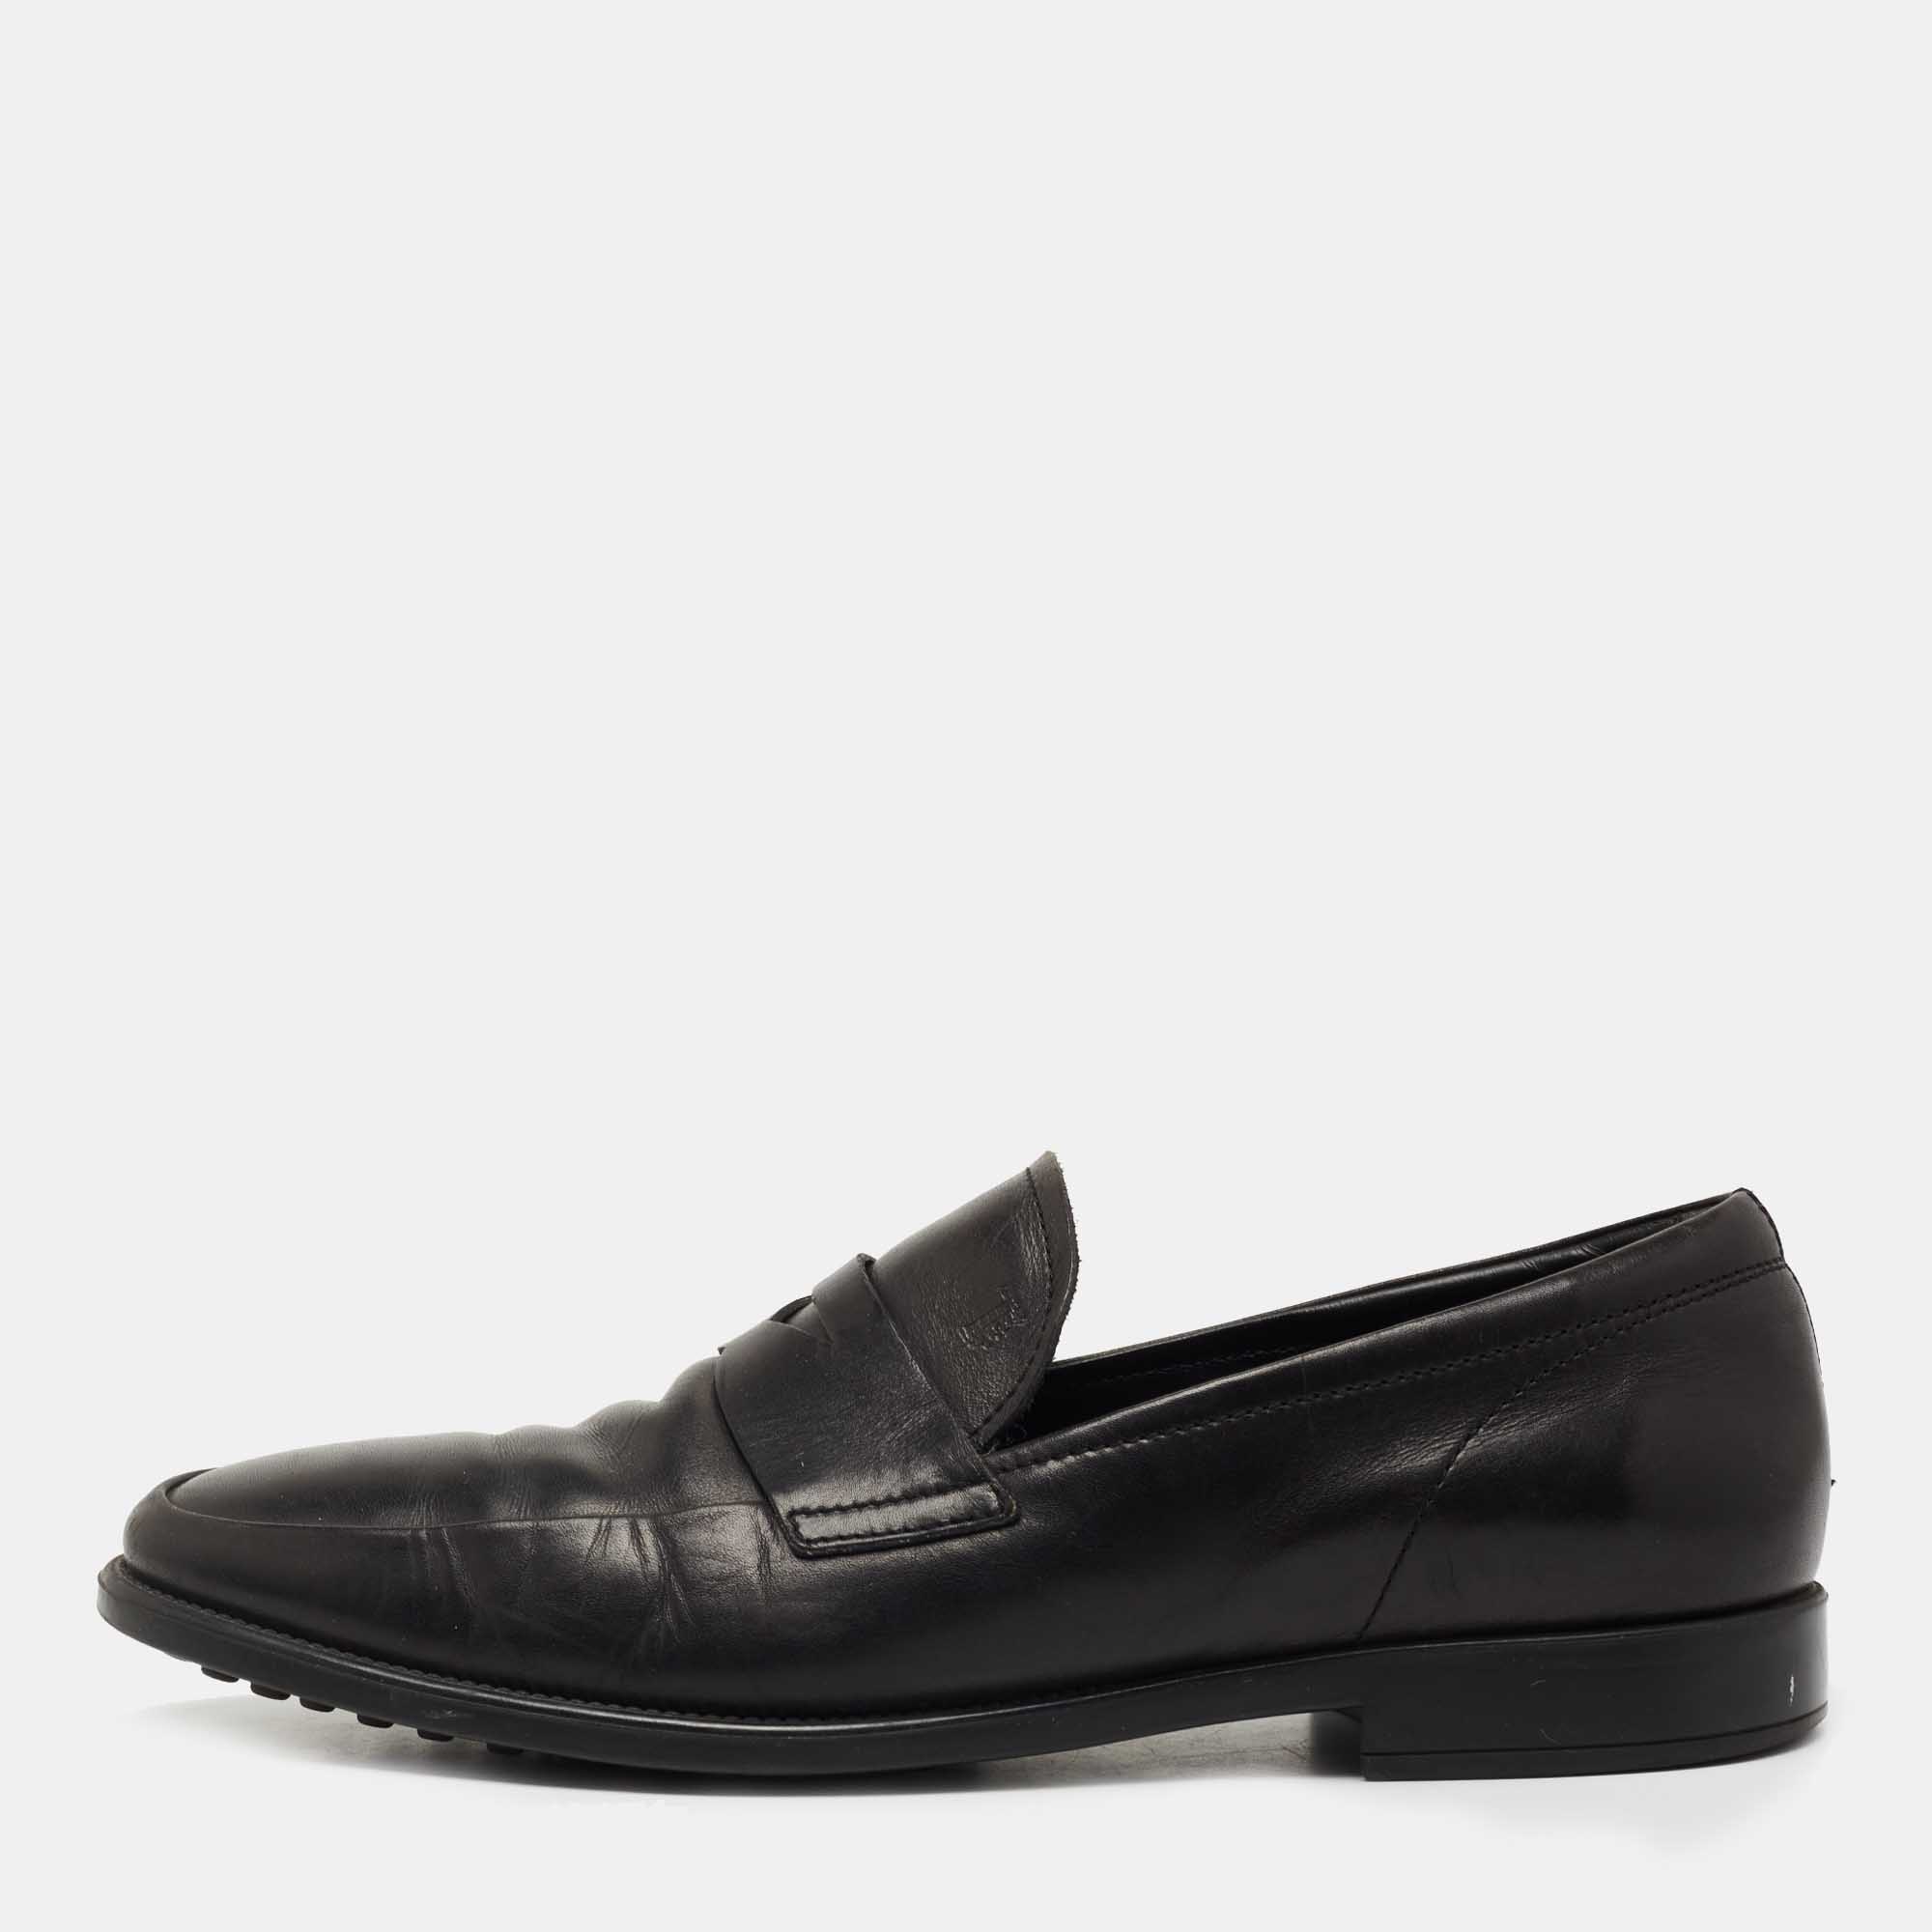 Pre-owned Tod's Black Leather Penny Slip On Loafers Size 39.5